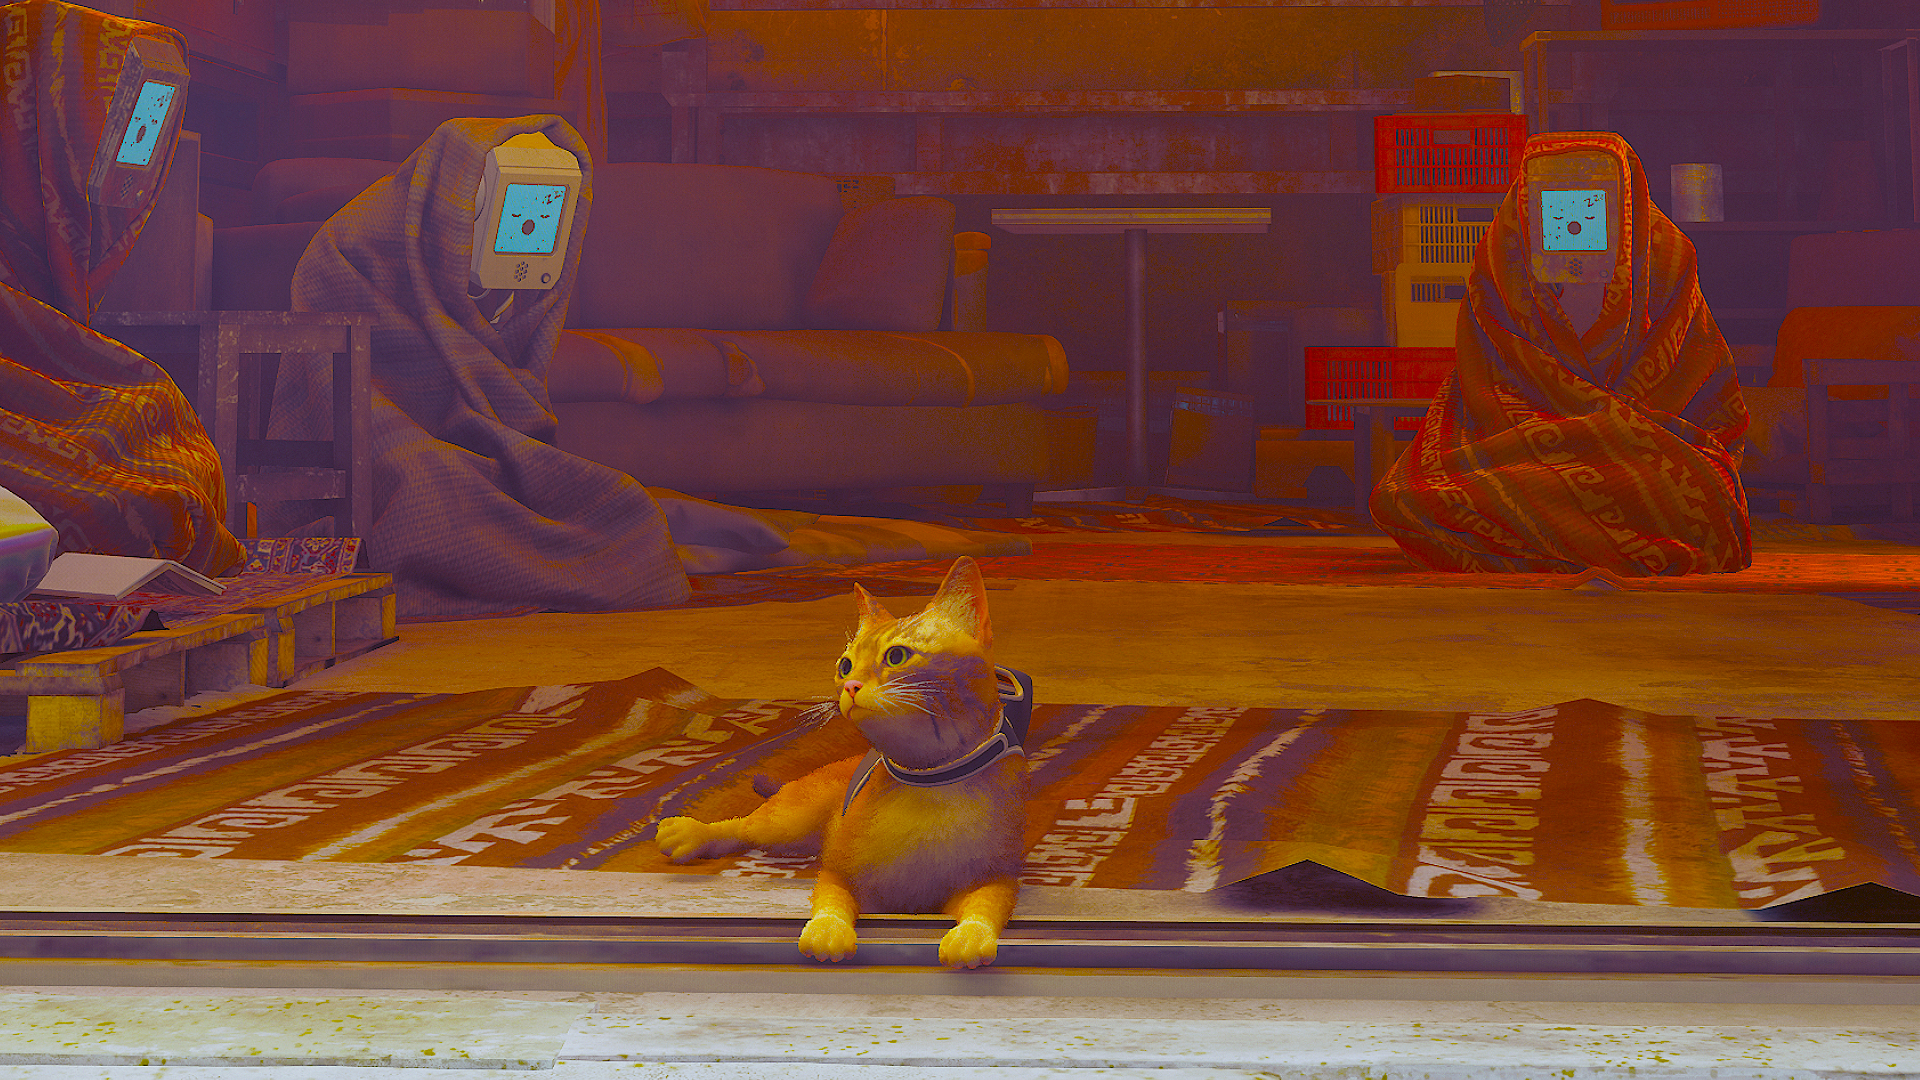 Stray isn't the cat game I wanted